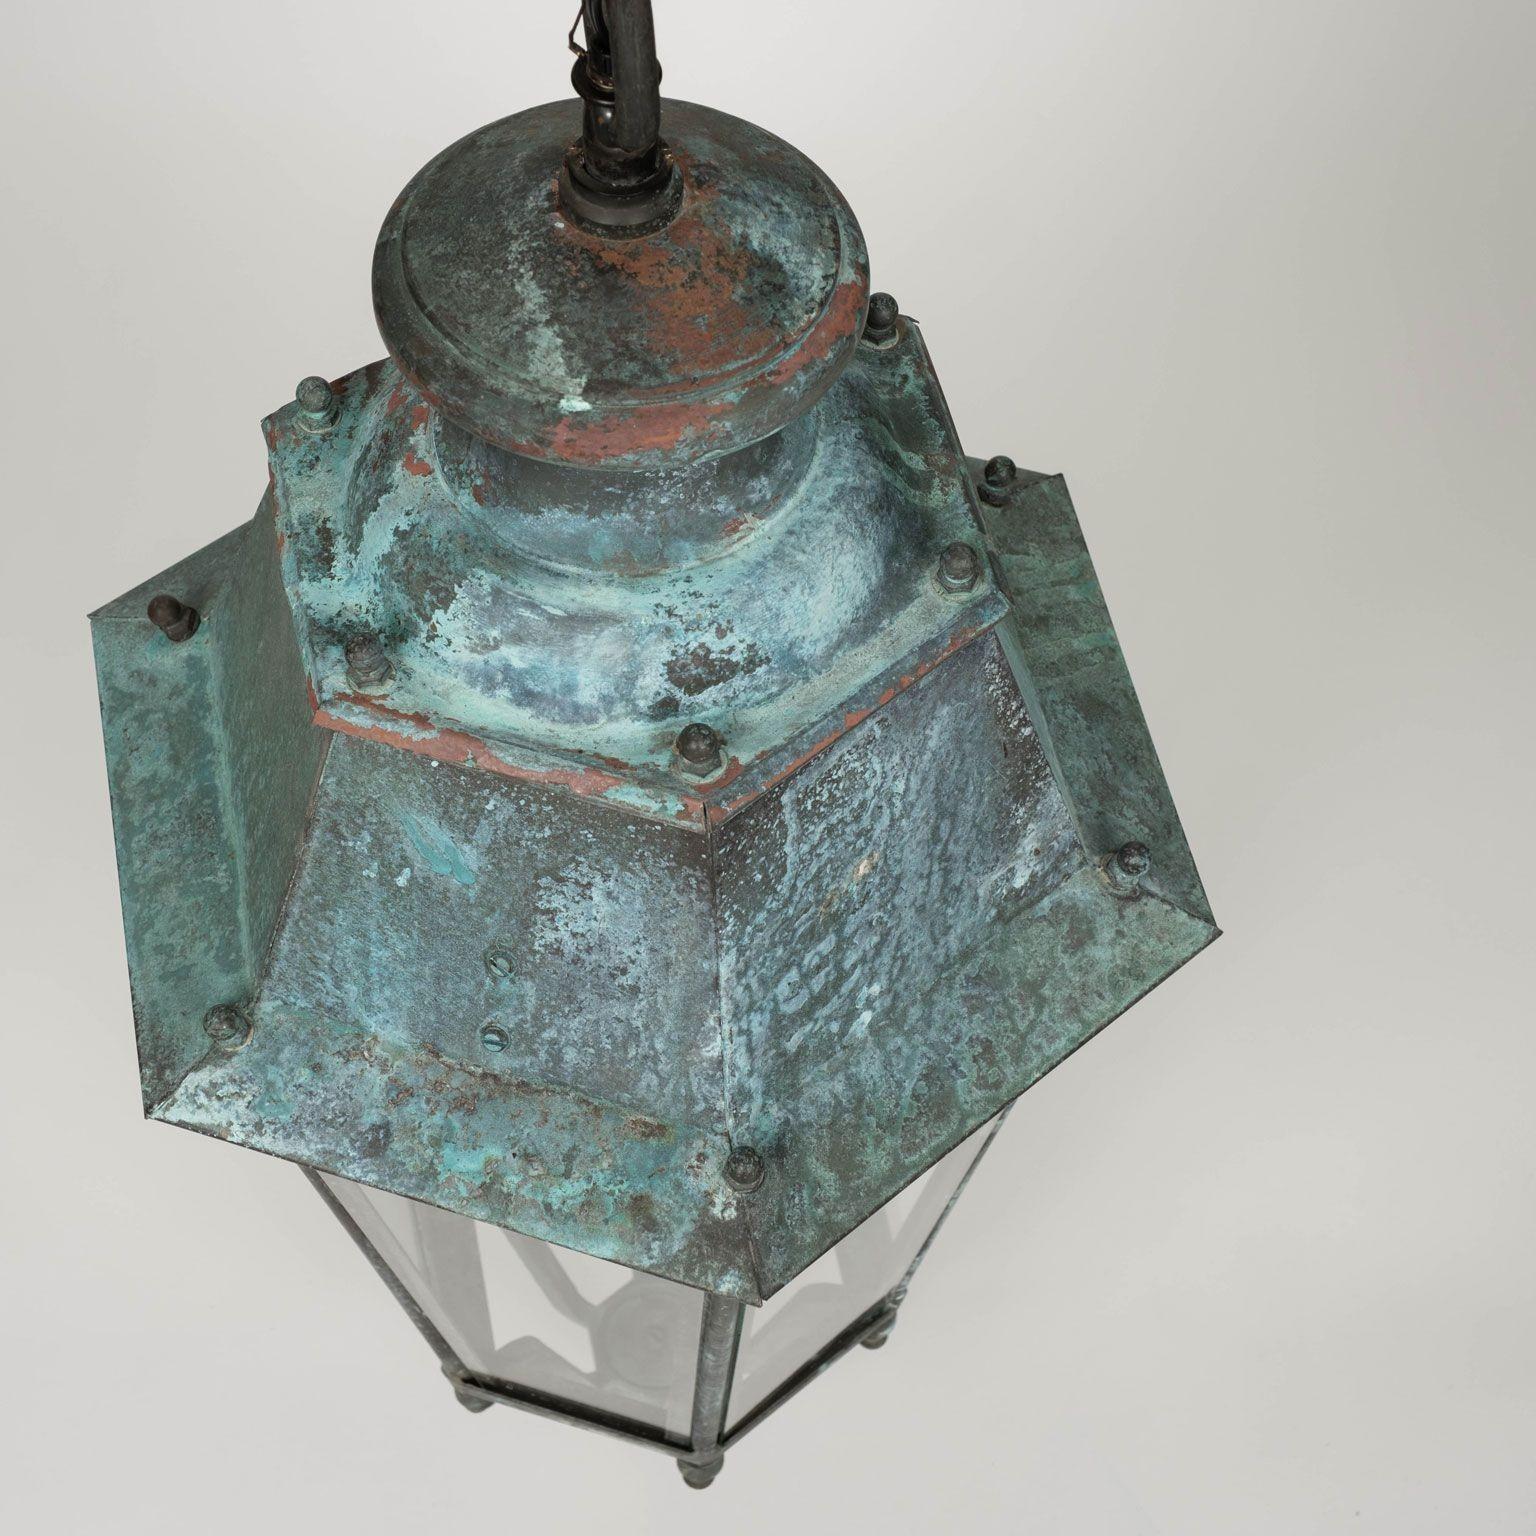 Pair of 19th century French Copper and glass paneled lanterns circa 1865-1884. Blue-green verdigris patina. Originally served as a gas-lit street lanterns - now newly-wired with a drop-cluster of three candelabra lights each. Includes four feet of